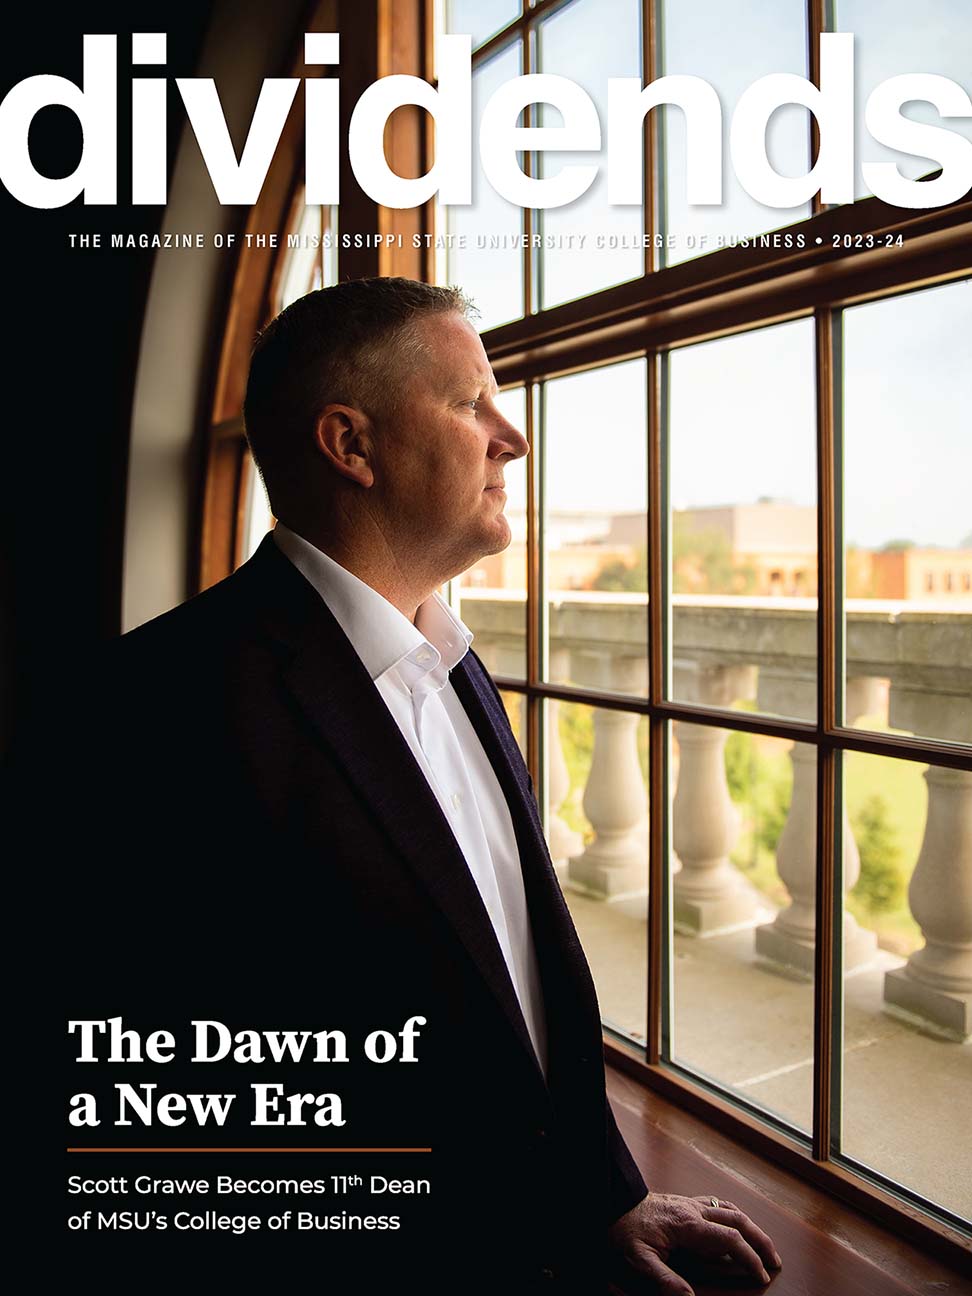 Dividends Magazine cover, 2023-24 edition, featuring new Dean Scott Grawe